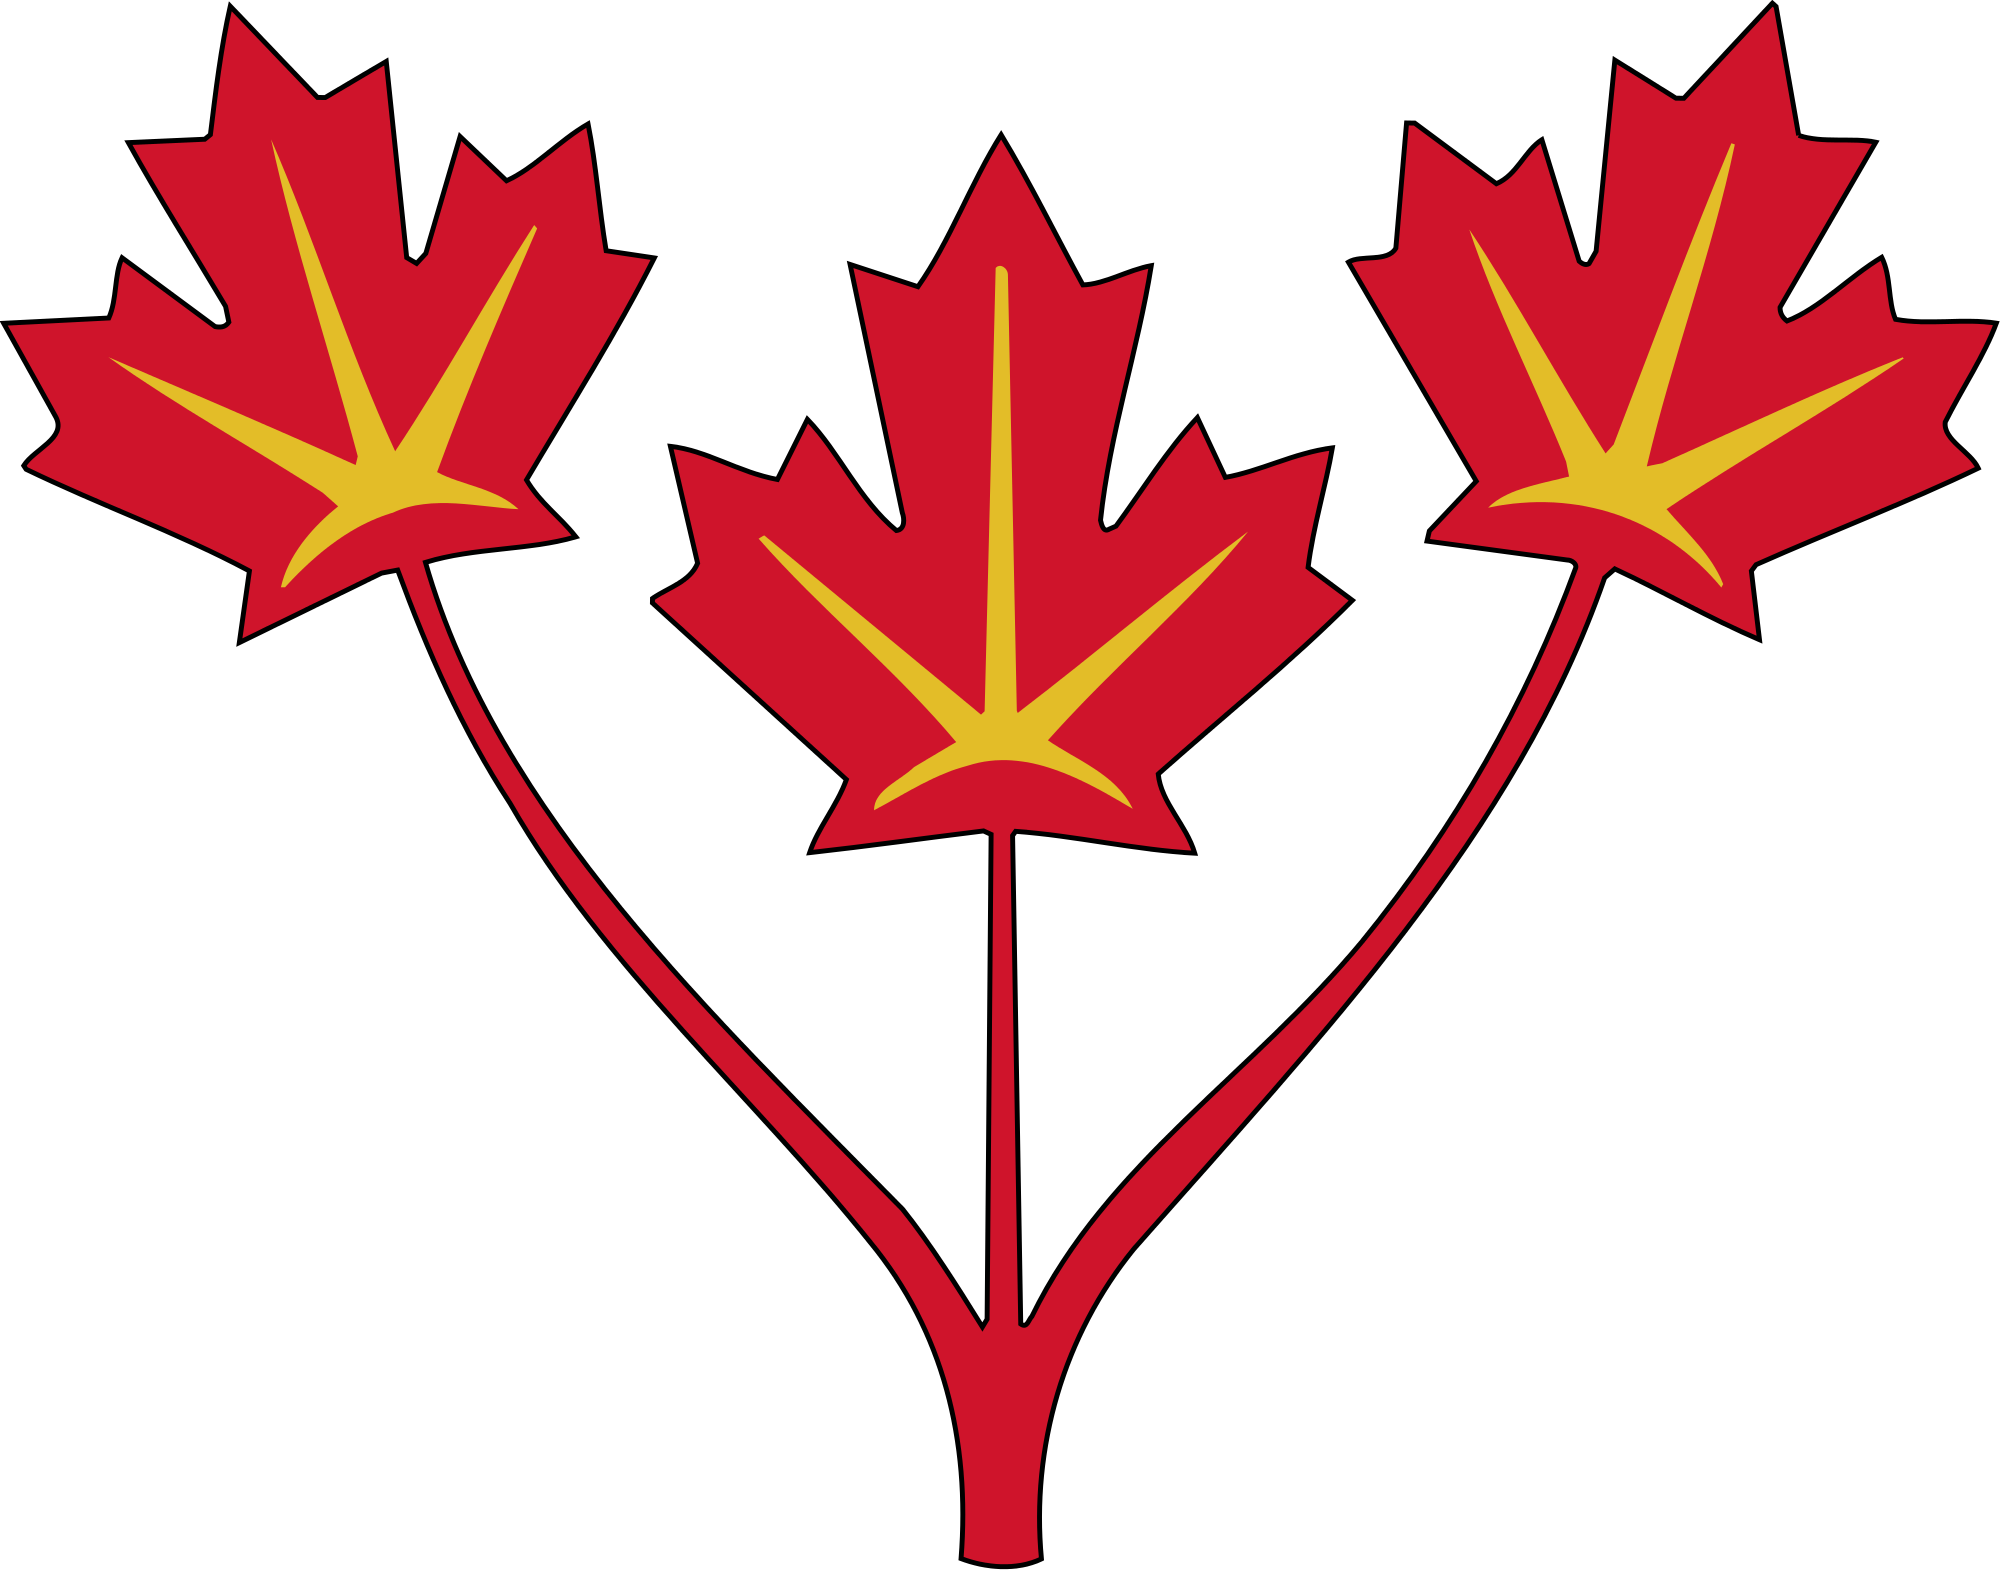 Stylized Maple Leaves Graphic